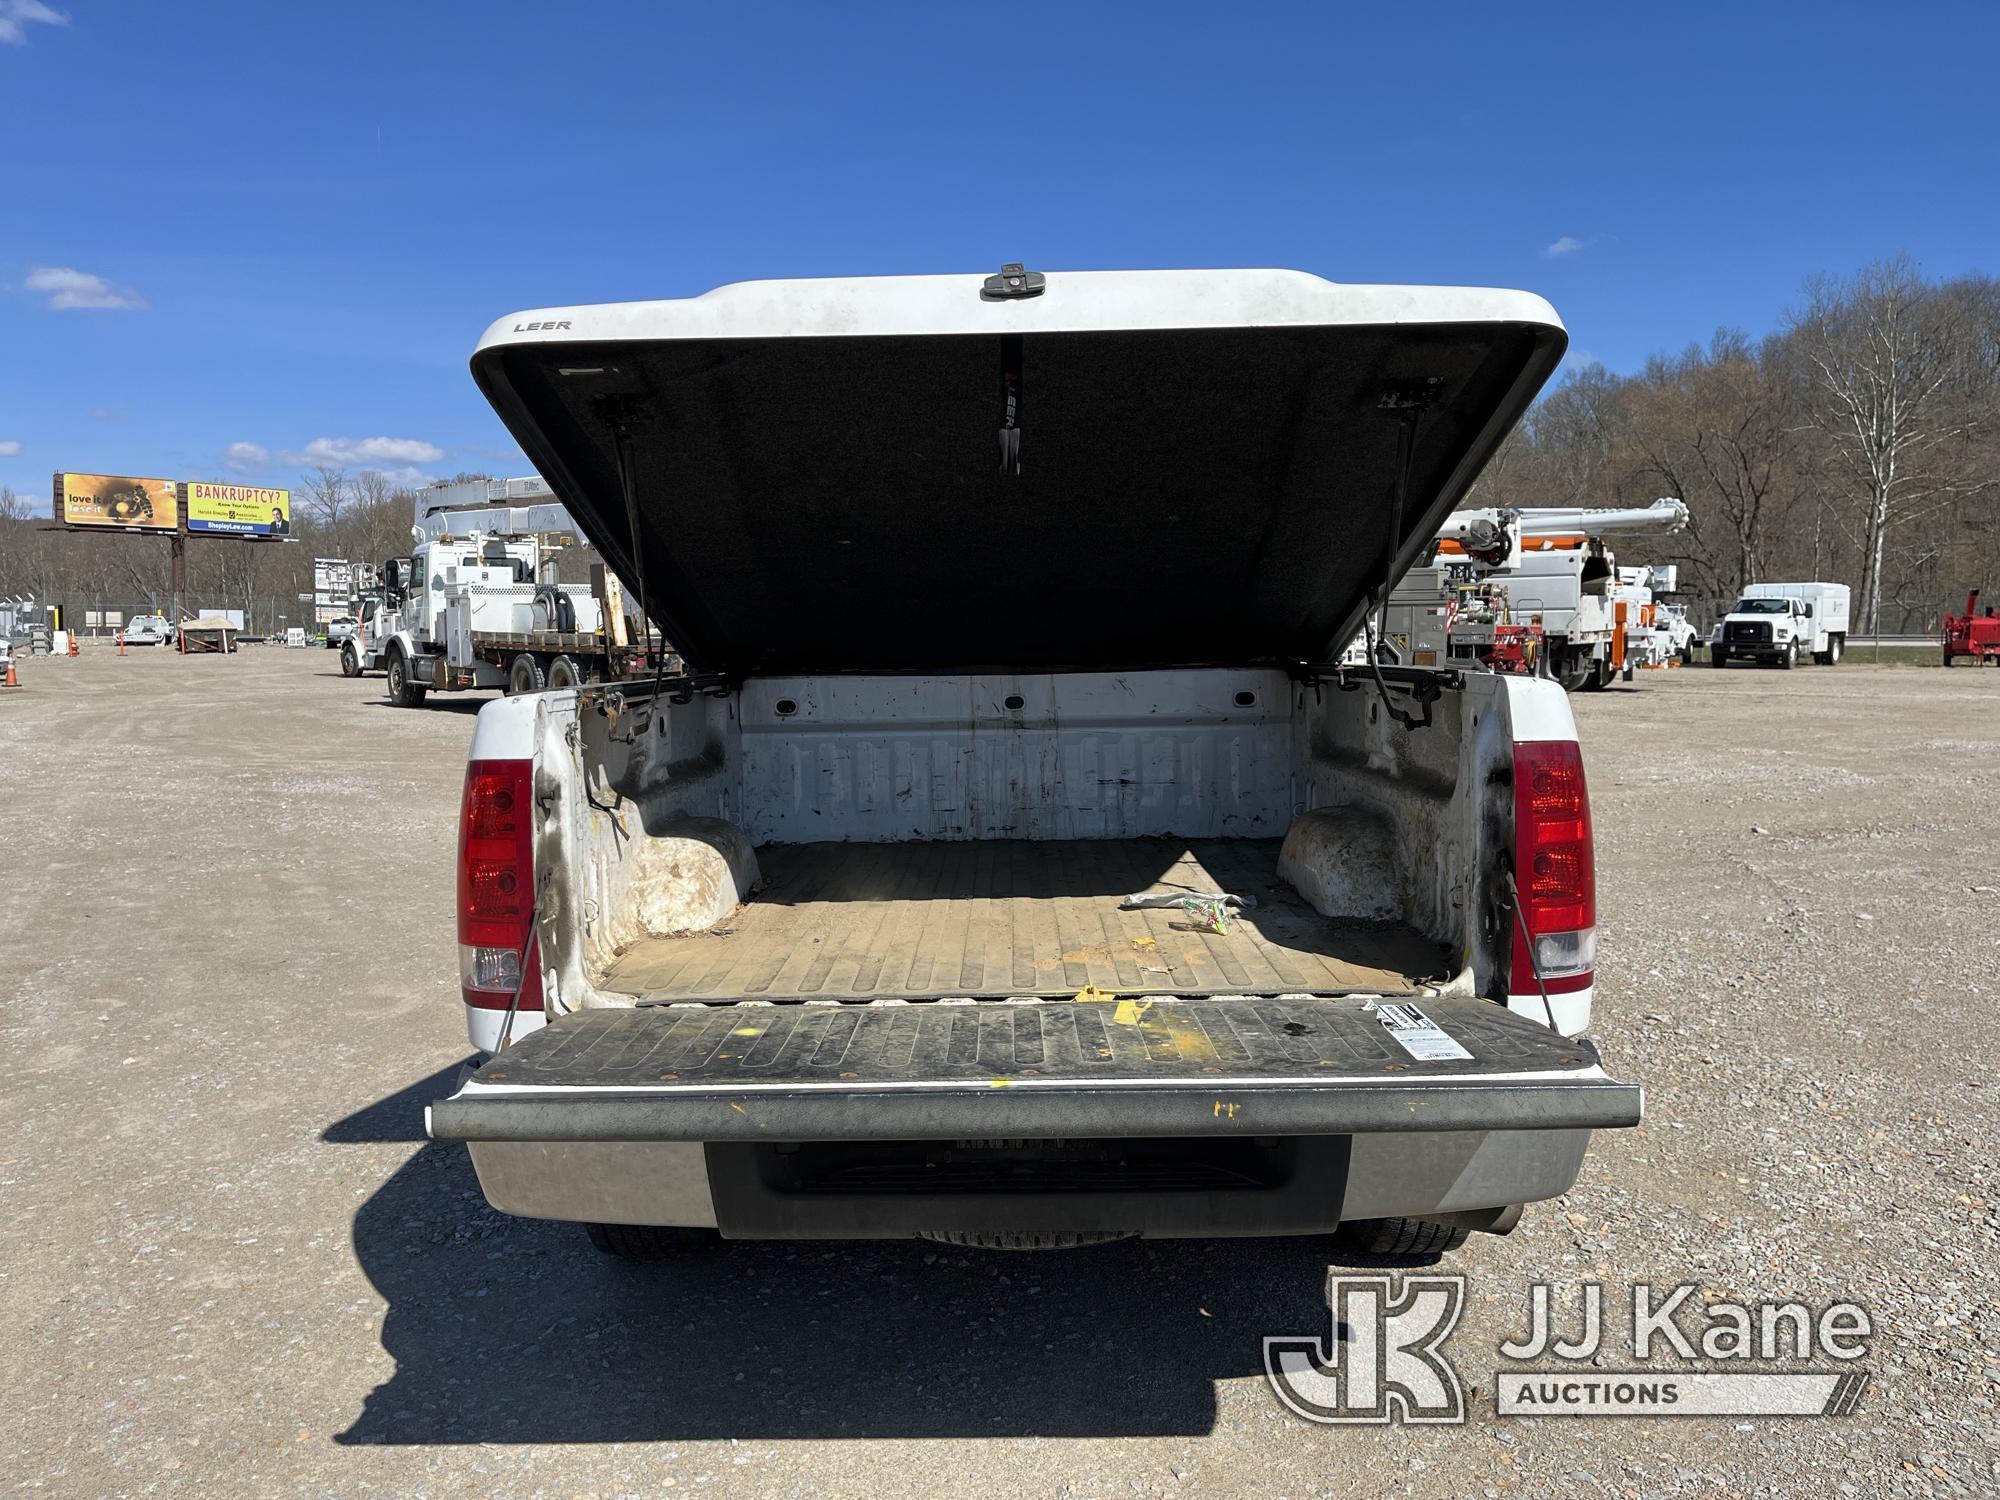 (Smock, PA) 2013 GMC Sierra 1500 4x4 Extended-Cab Pickup Truck Title Delay) (Runs & Moves, Check Eng